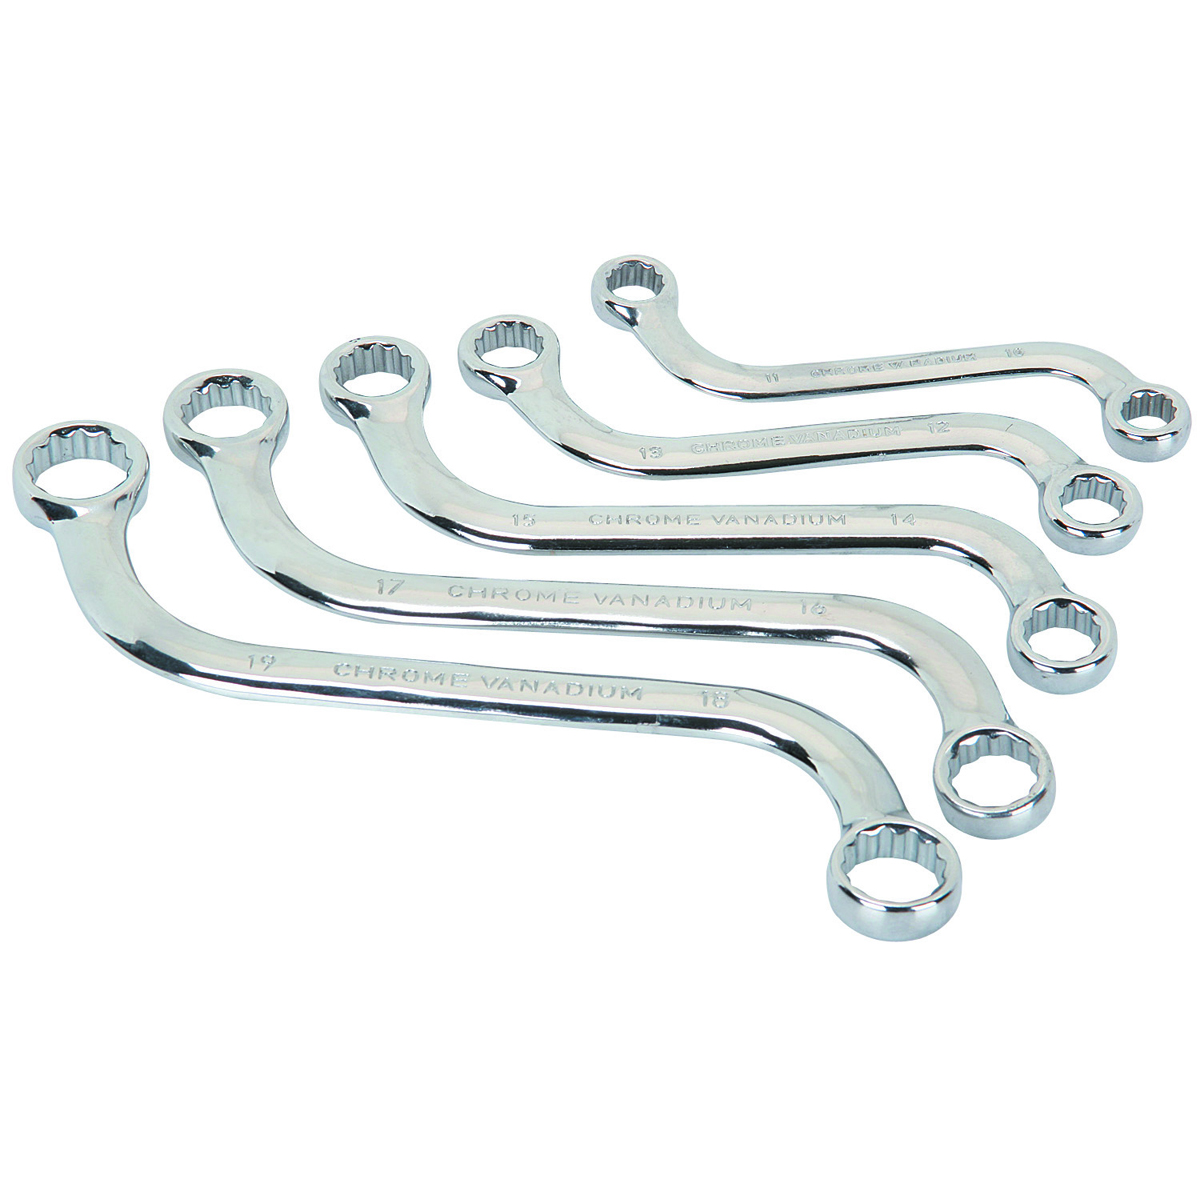 PITTSBURGH Metric S-Type Obstruction Wrench Set 5 Pc. - Item 99699